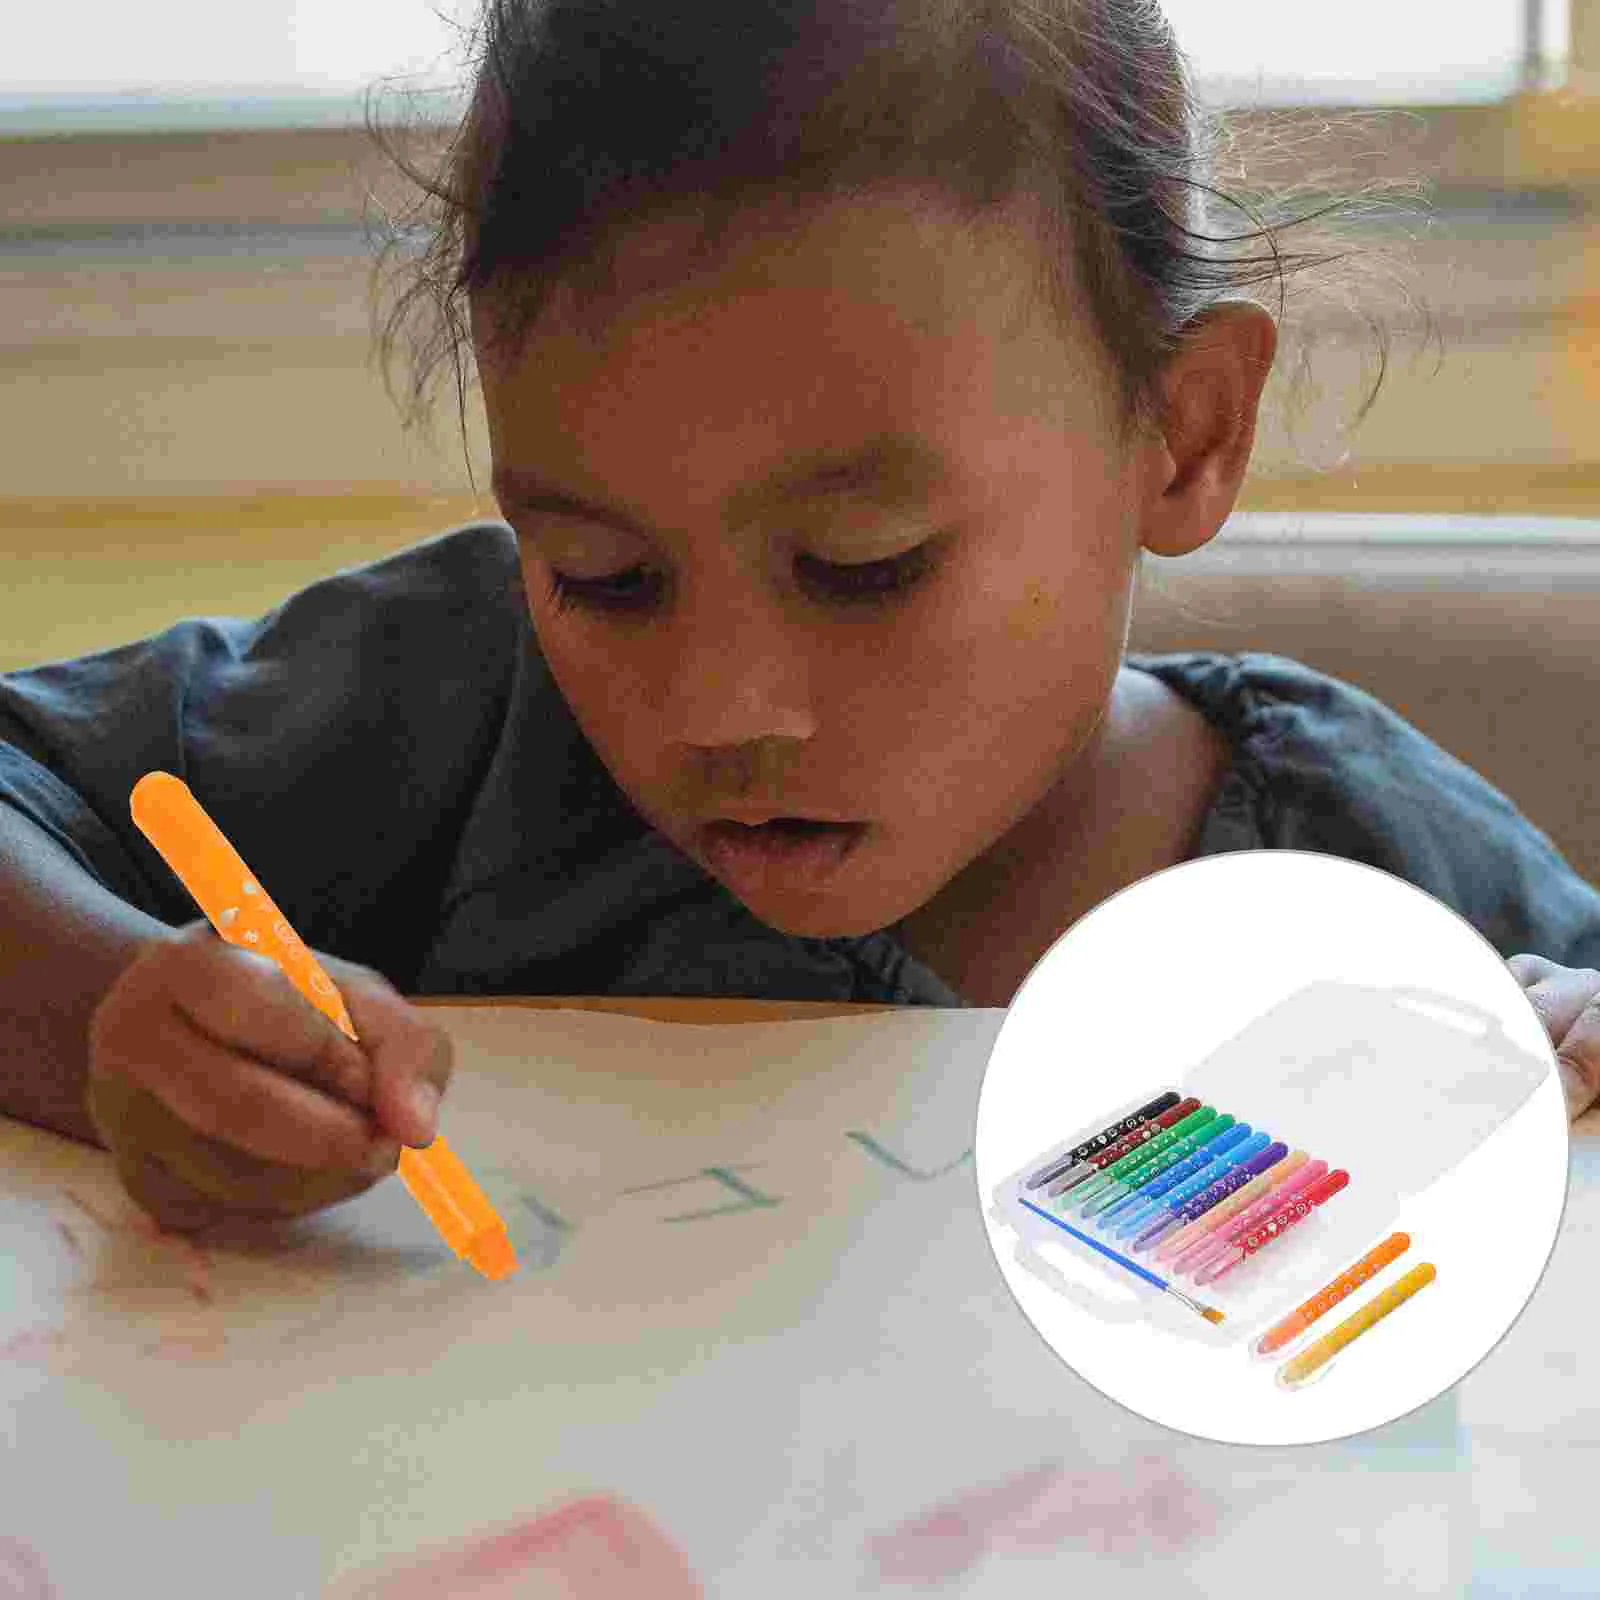 

Crayons Washable Painting Markers Non Toddlers Sticks Rotating Tools Twistable Big Triangle